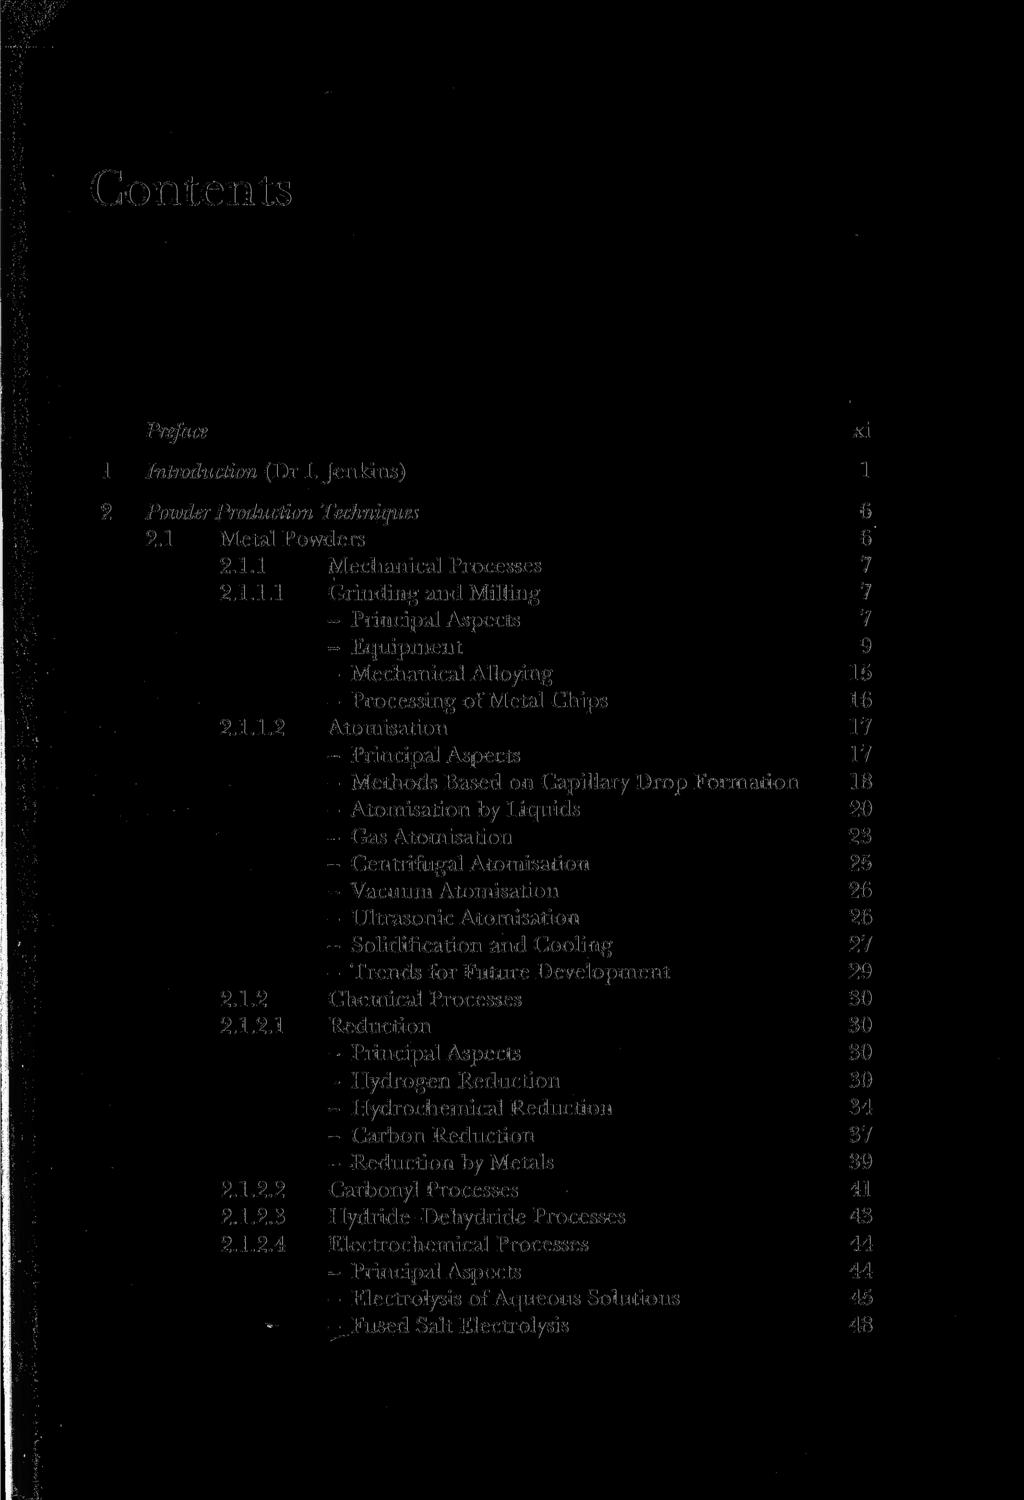 Contents Preface 1 Introduction (Dr I. Jenkins) 1 2 Powder Production Techniques 6 2.1 Metal Powders 6 2.1.1 Mechanical Processes 7 2.1.1.1 Grinding and Milling 7 - Principal Aspects 7 - Equipment 9 - Mechanical Alloying 15 - Processing of Metal Chips 16 2.